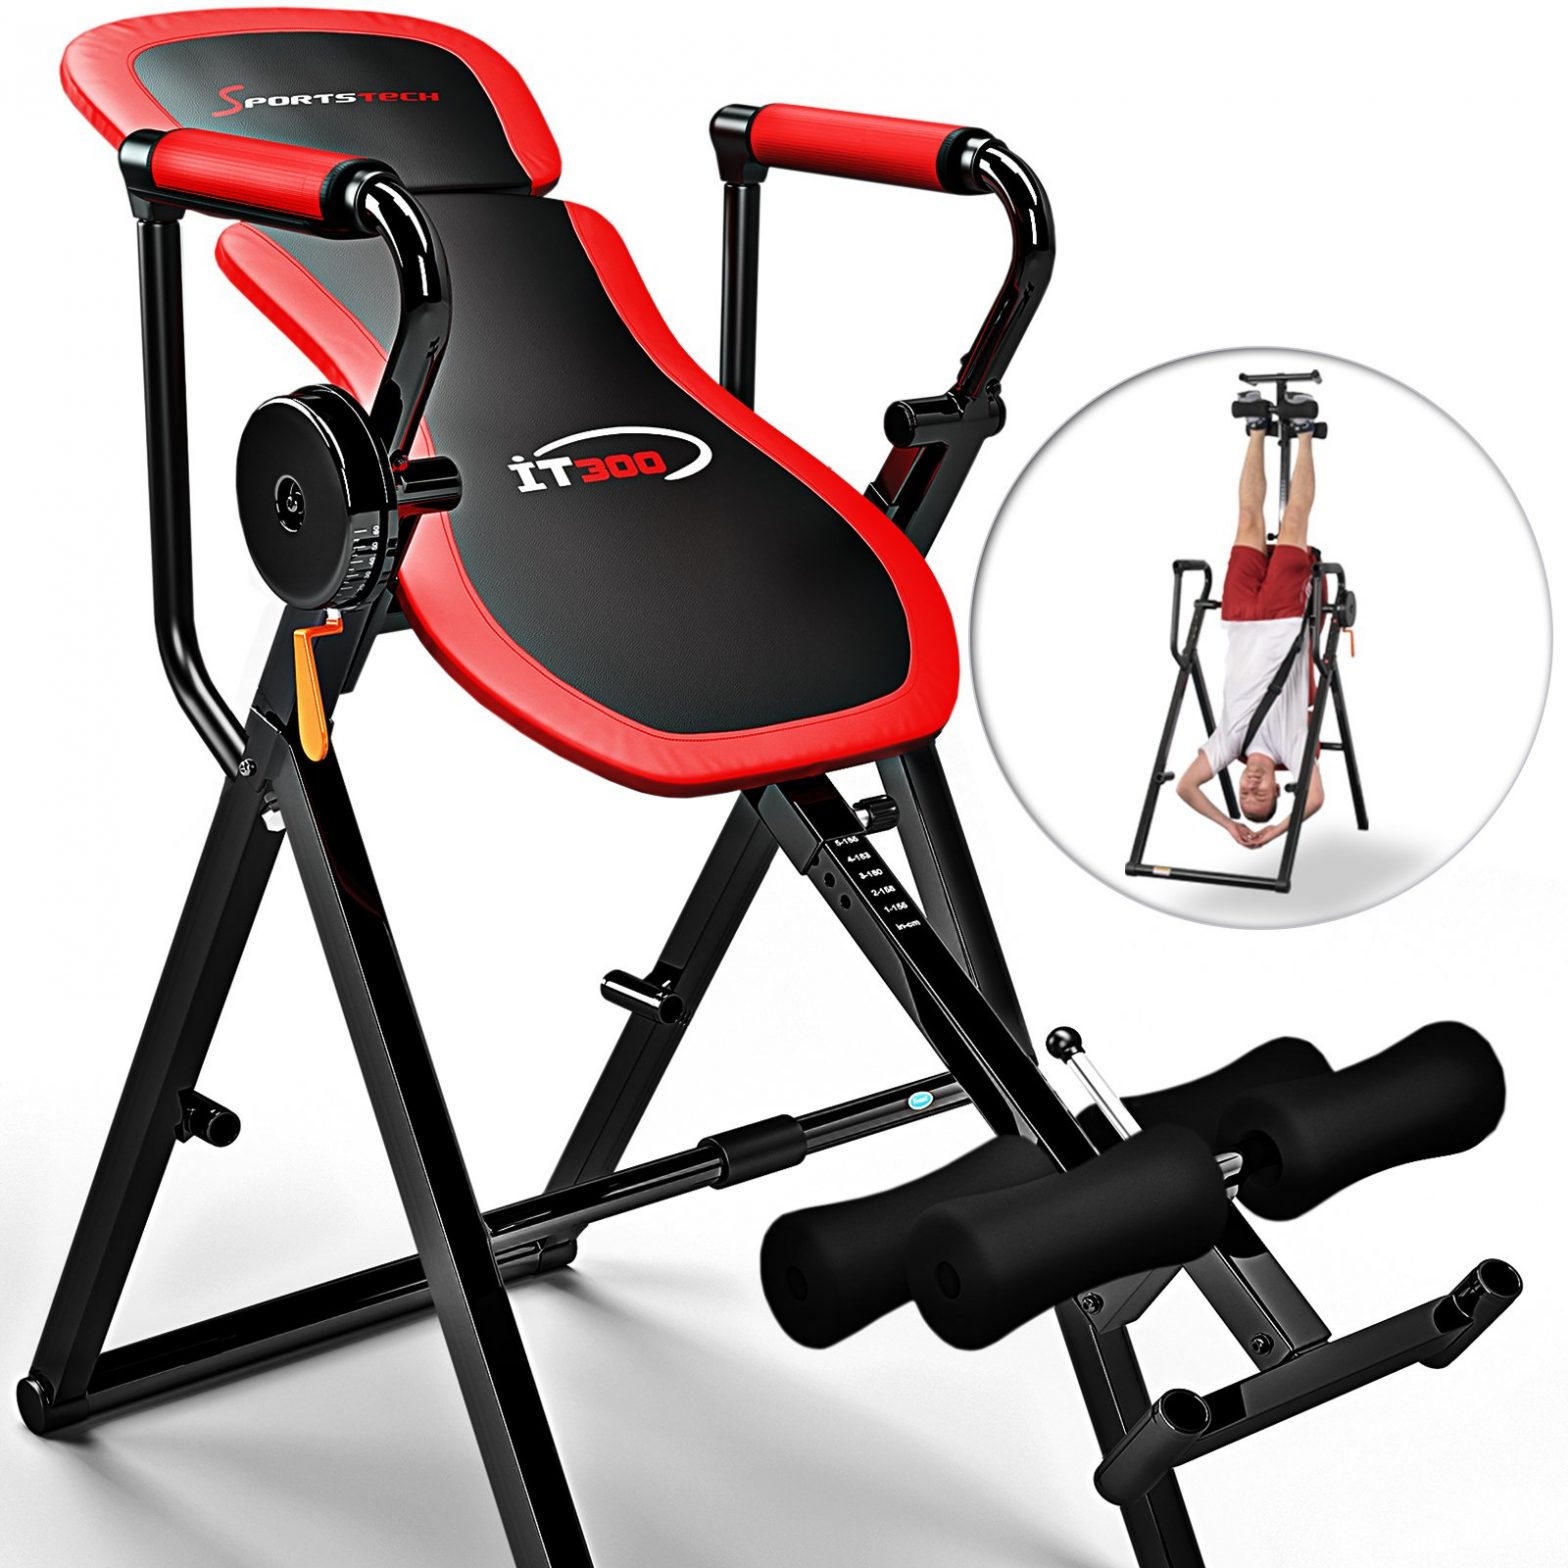 SPORTSTECH 6-in-1 Inversion Bench User Manual